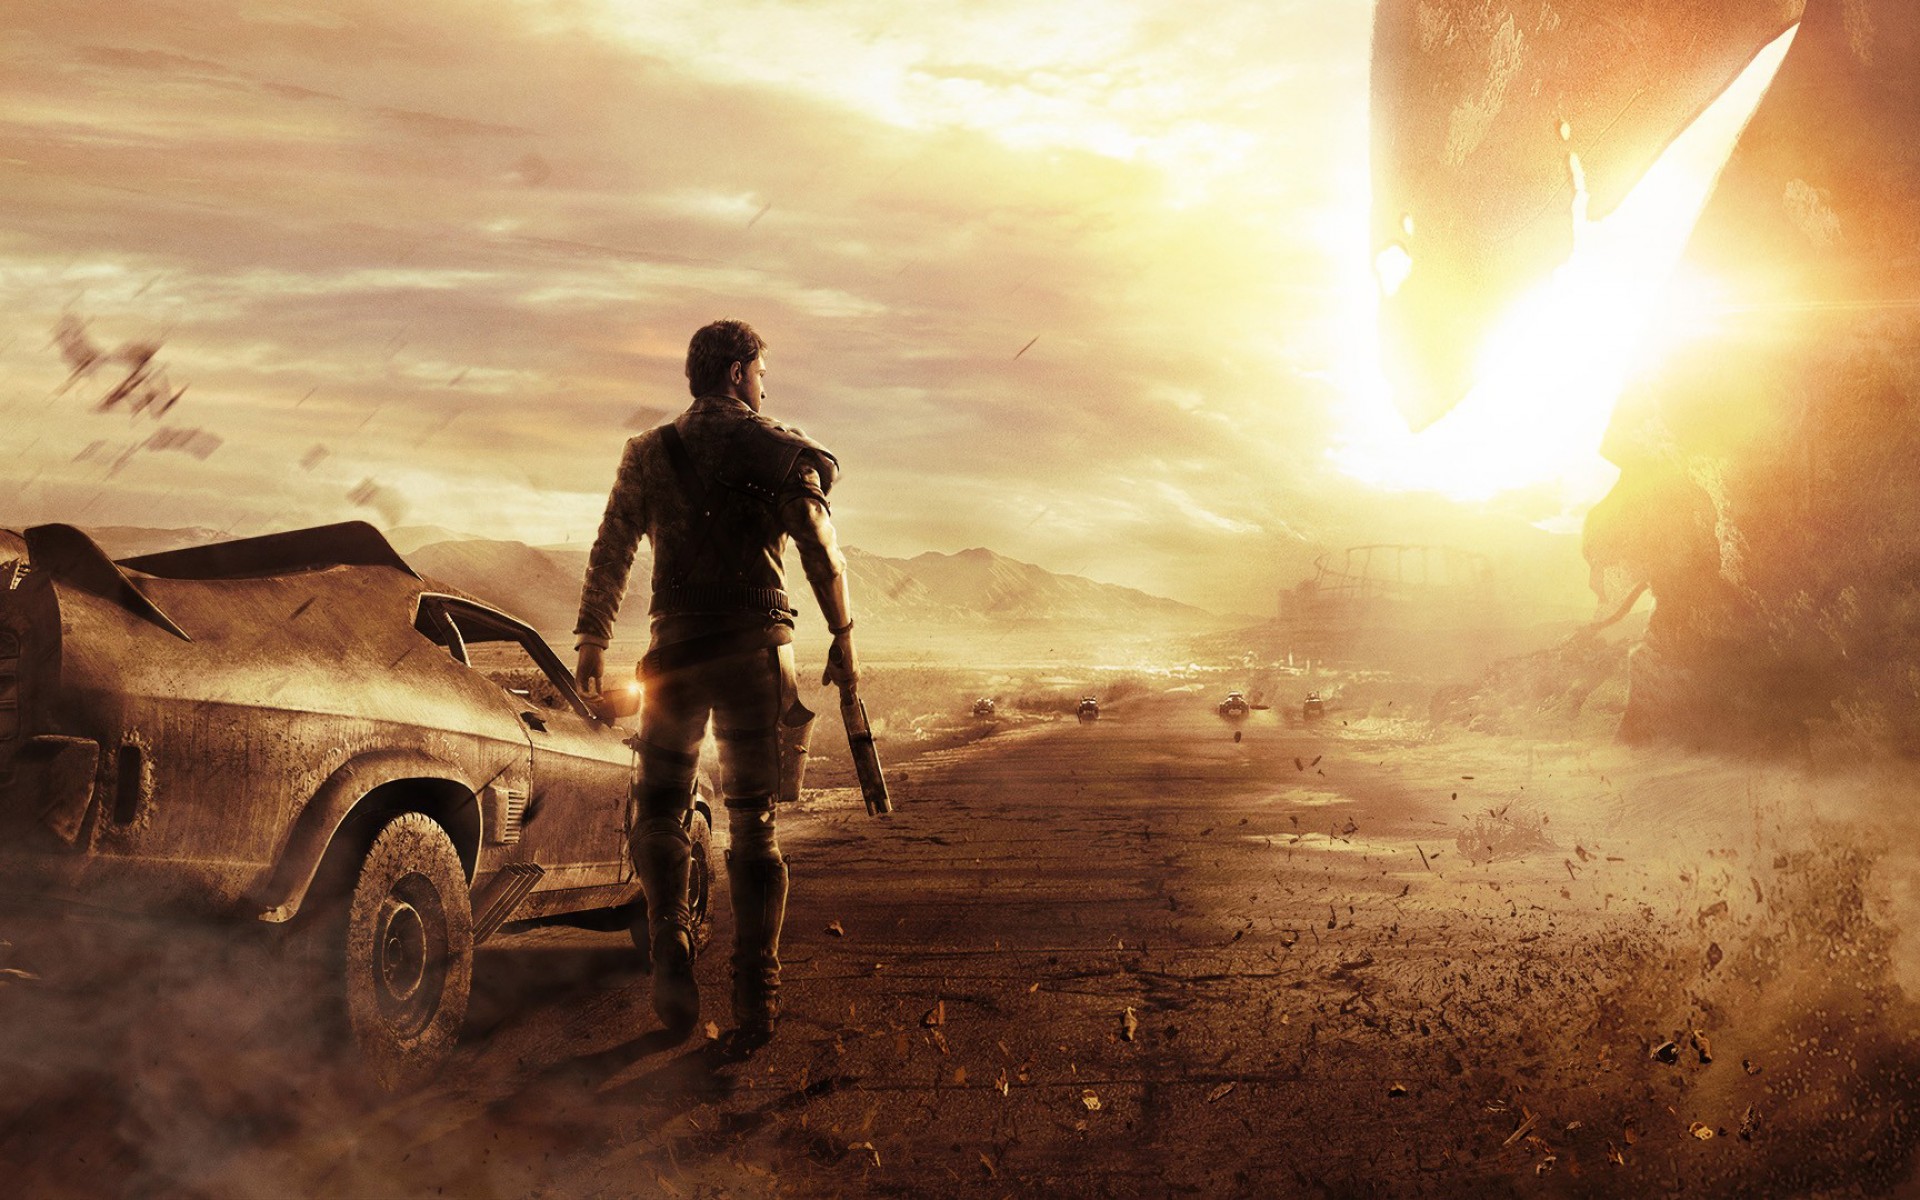 “Mad Max” Gameplay Overview - The Wasteland Is No Place For A Conscience